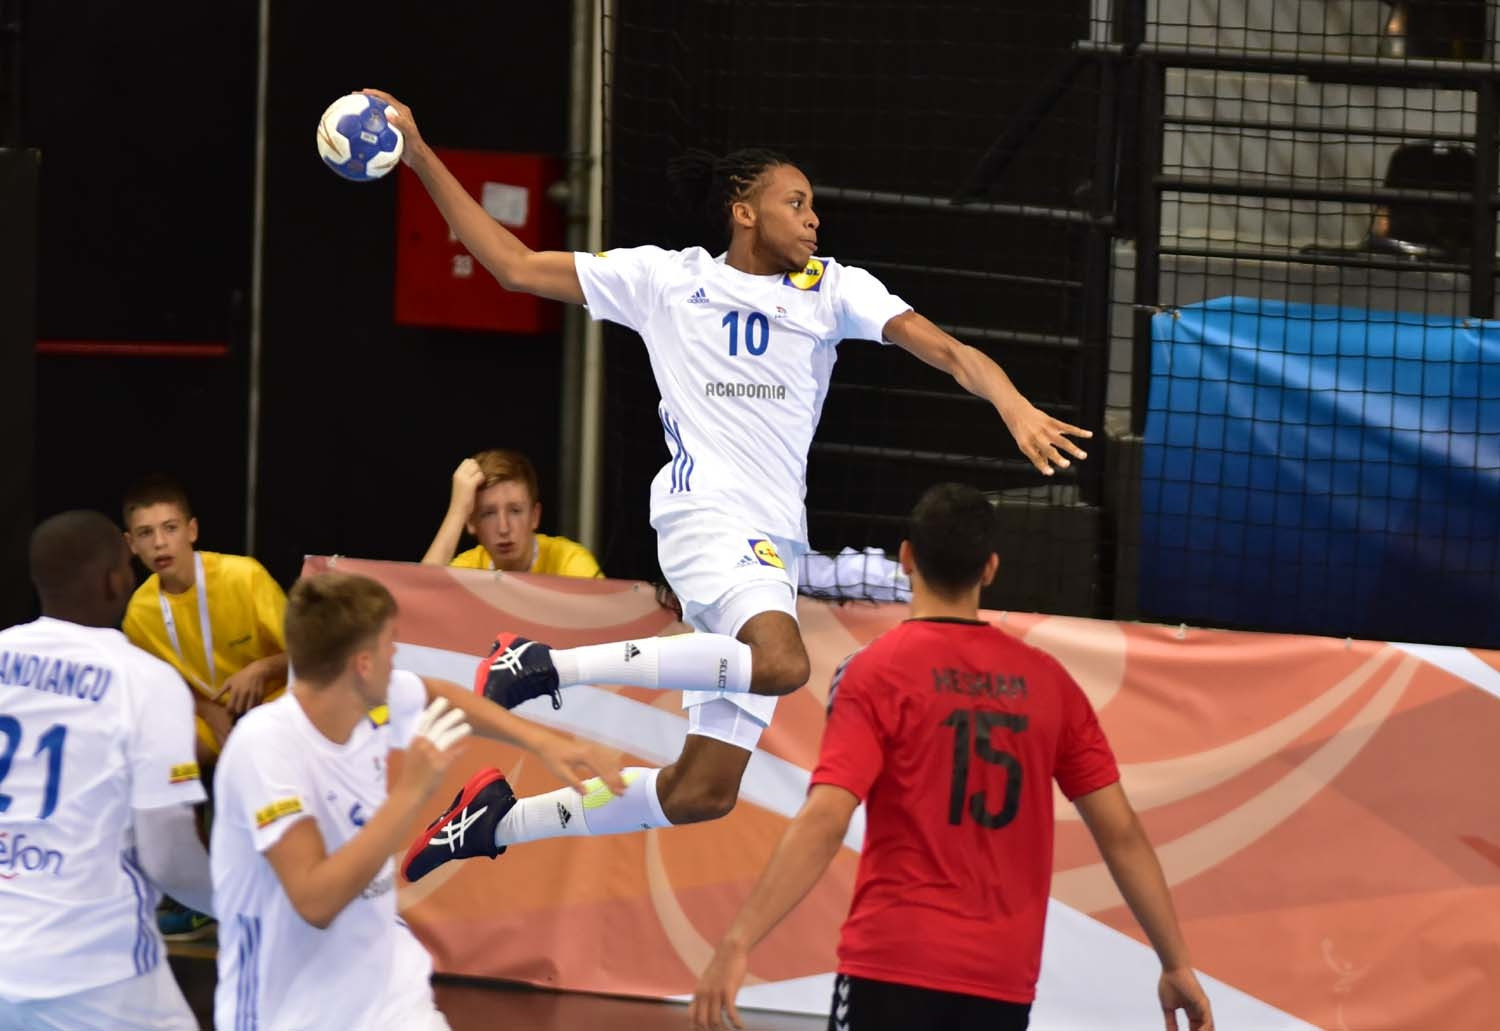 Defending champions France had enough to beat Egypt ©IHF